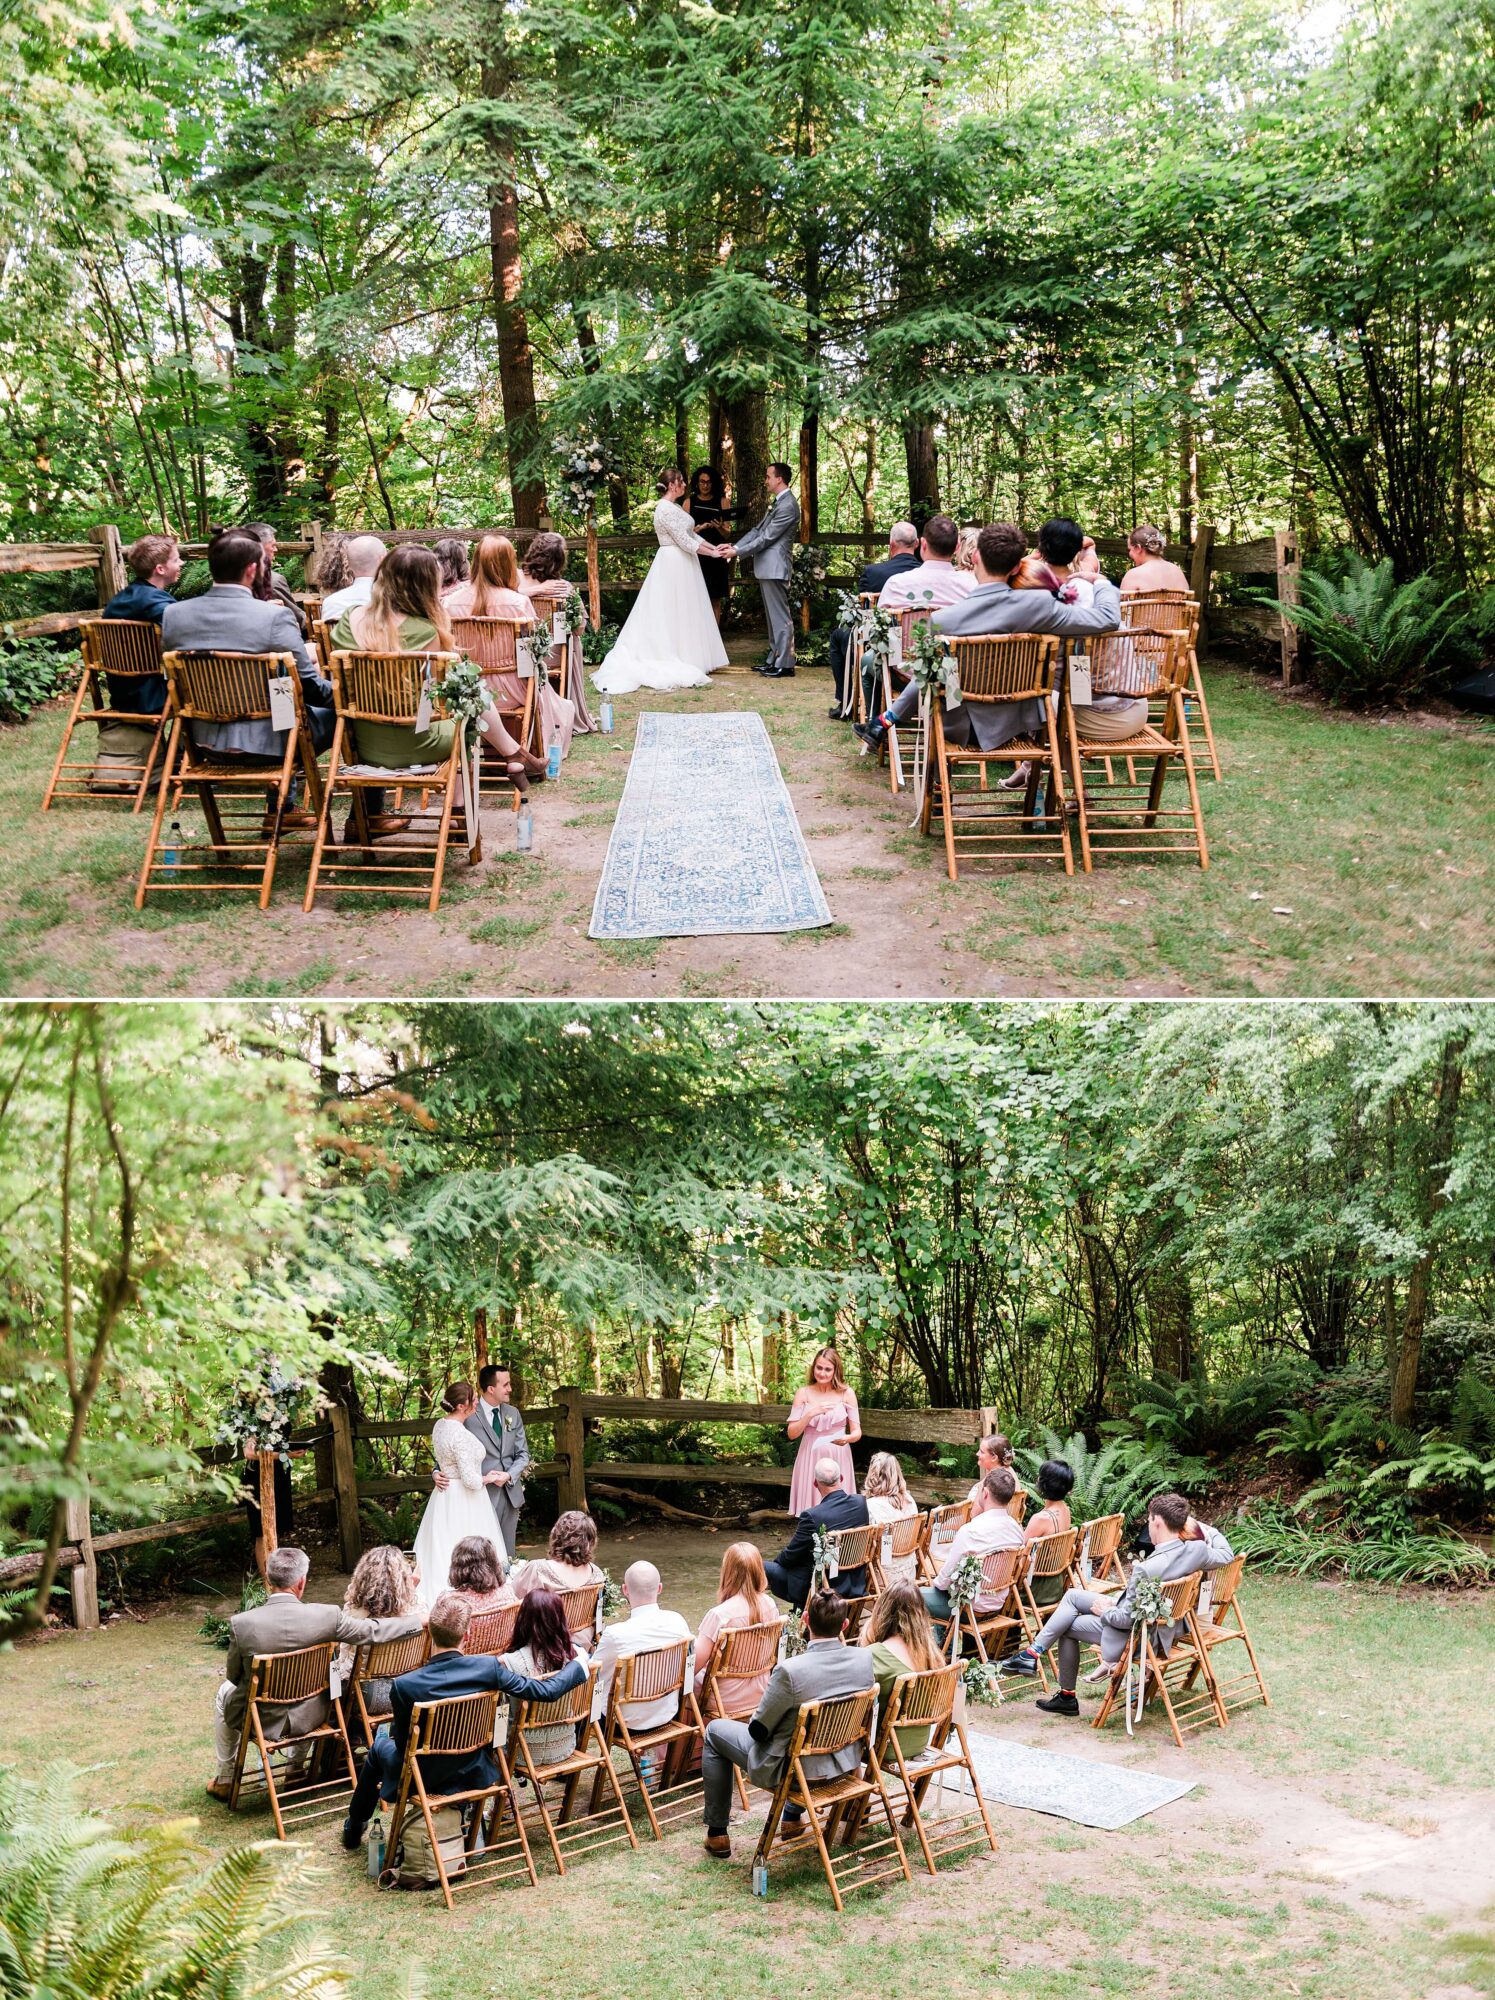 Forest wedding ceremony at the Grotto at St. Edward park in Kenmore outside Seattle WA